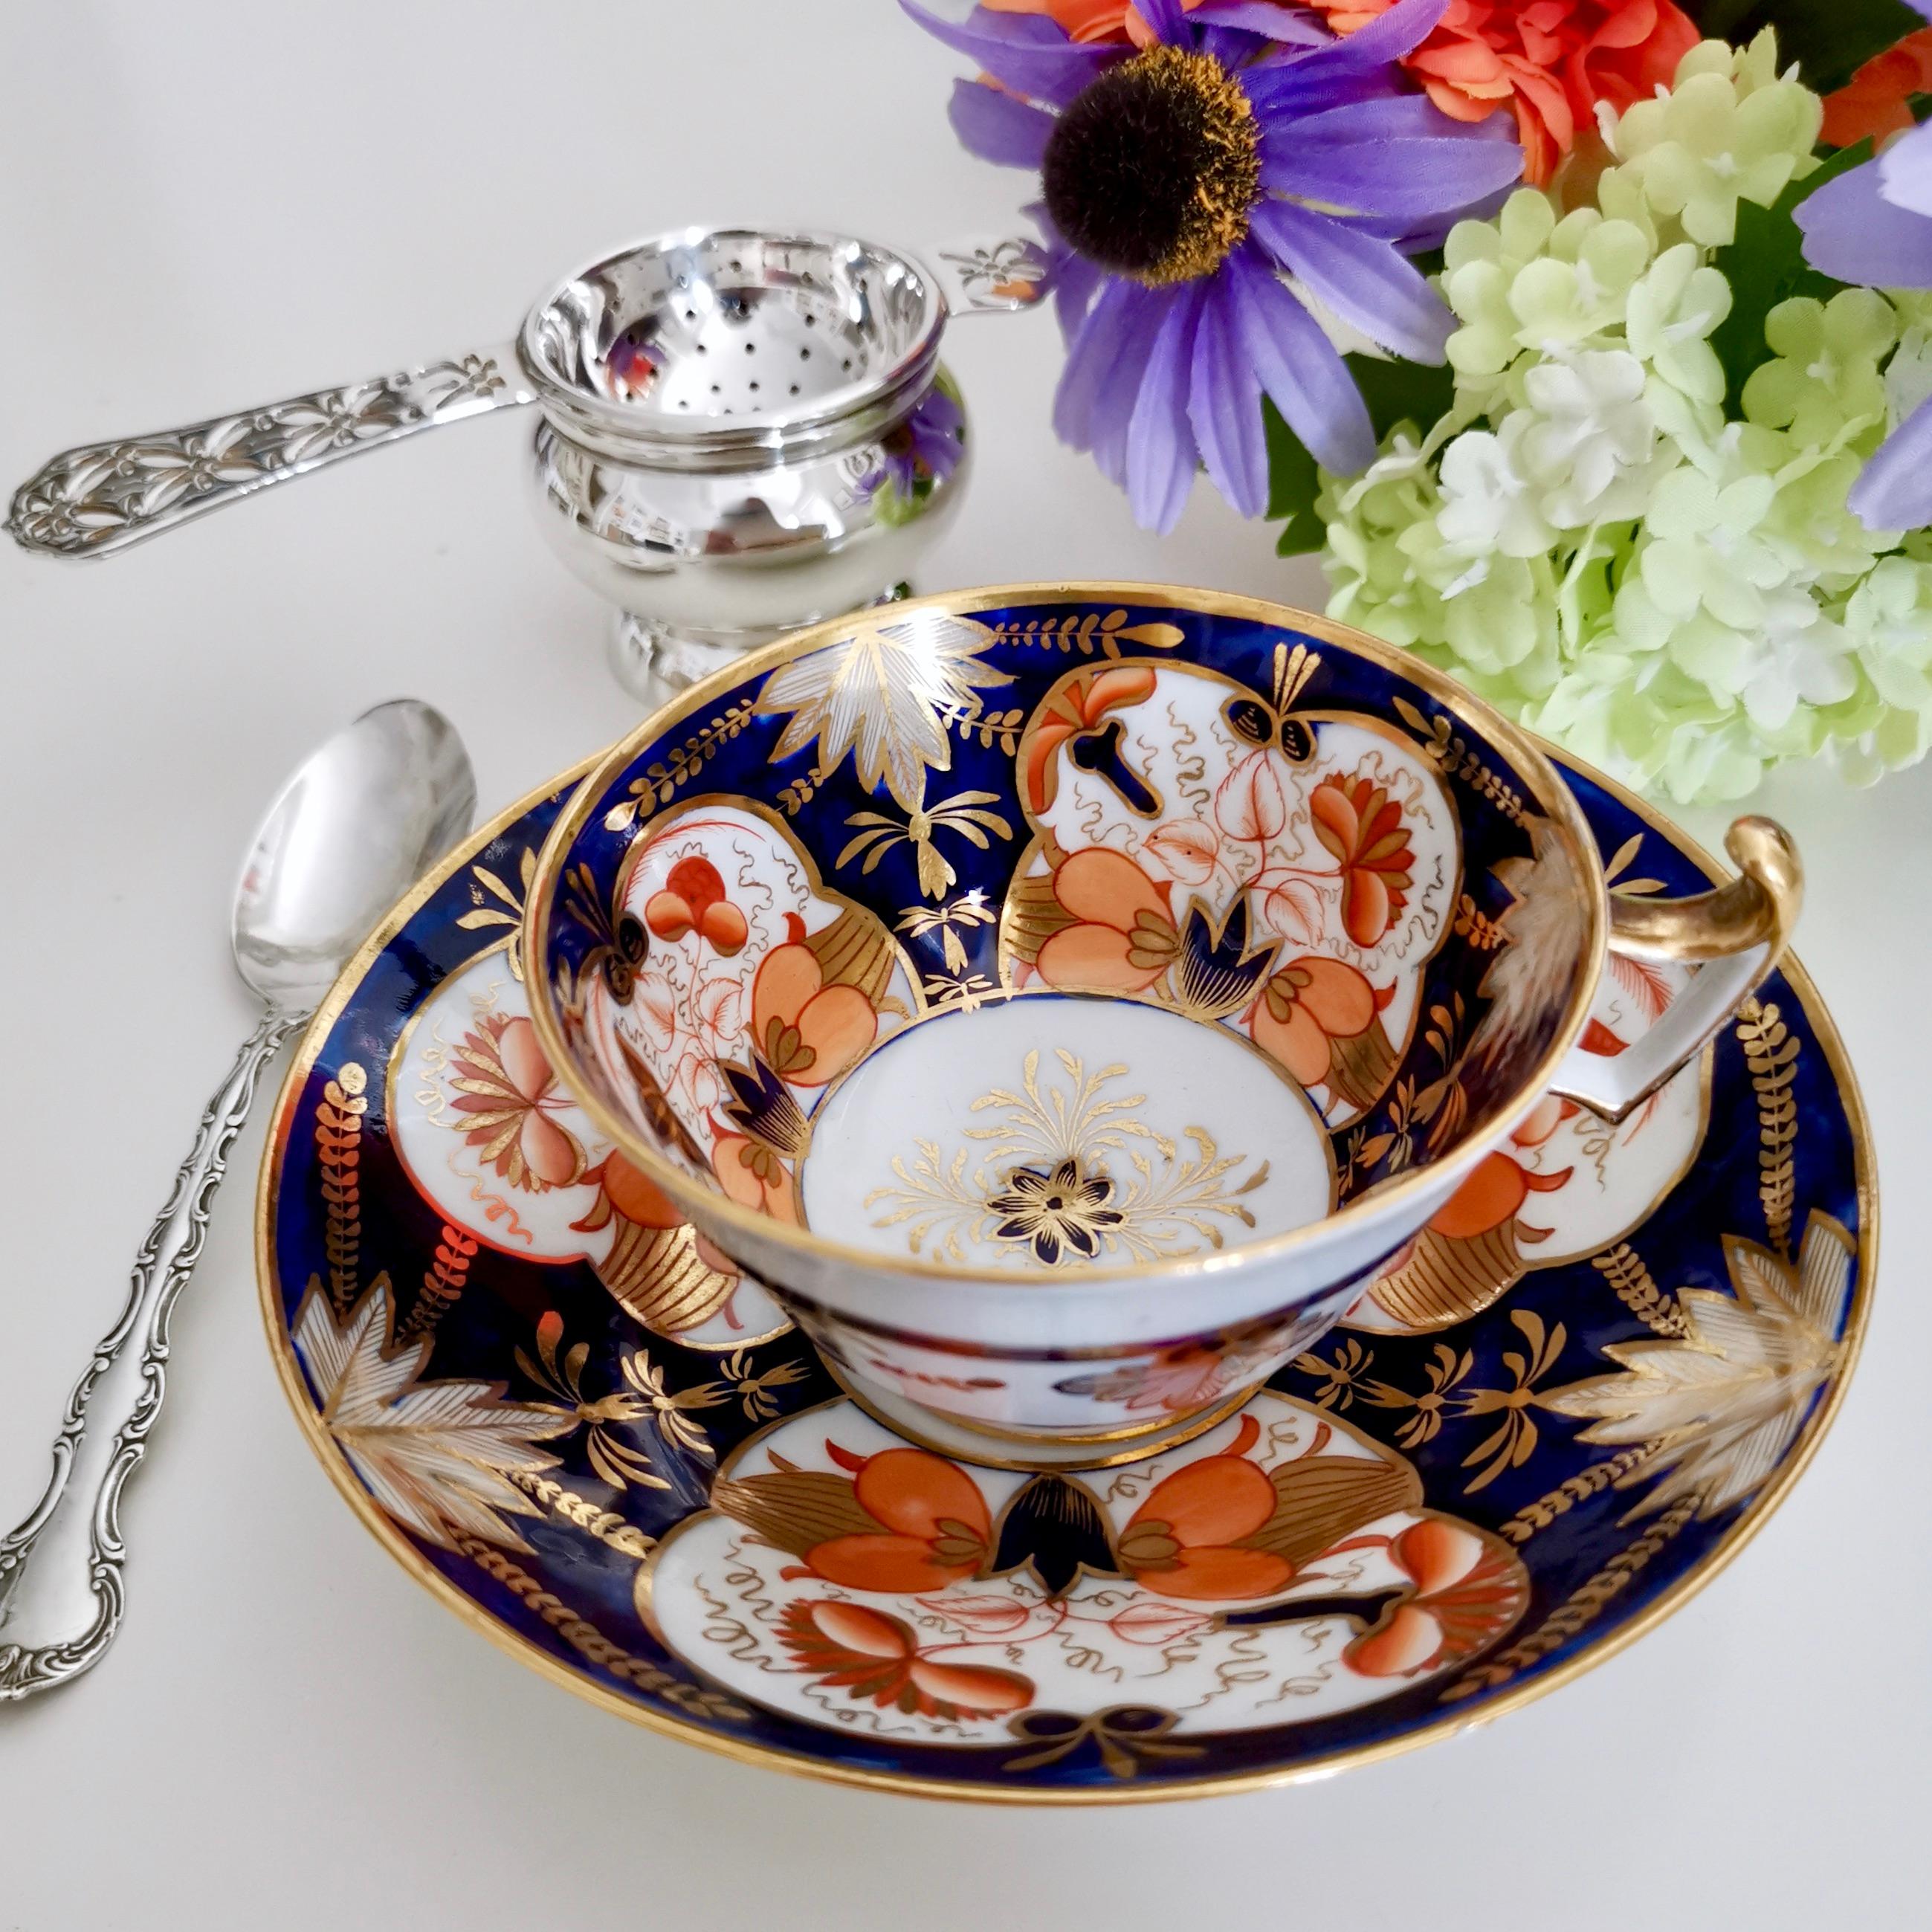 This is a beautiful teacup and saucer made by John Rose / Coalport in circa 1815, decorated in the Japanese Imari style with a striking cobalt blue, orange and gilt pattern.

Coalport was one of the leading potters in 19th and 20th century